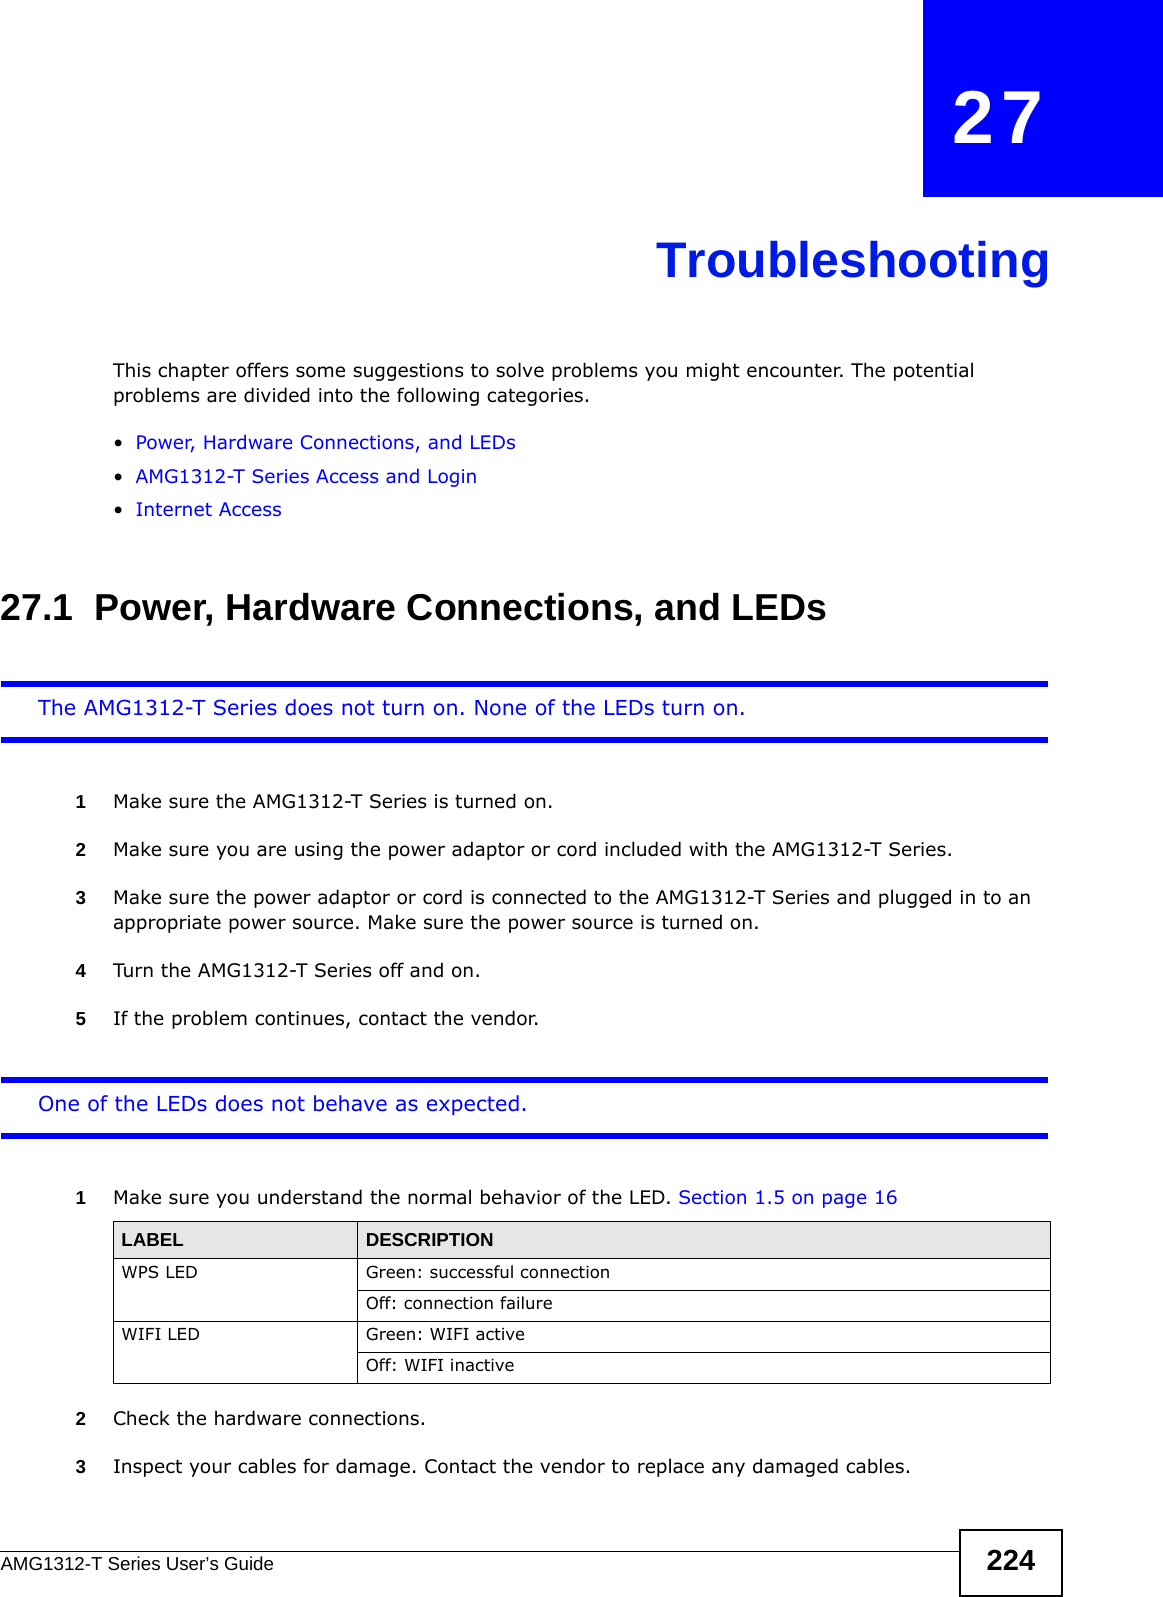 AMG1312-T Series User’s Guide 224CHAPTER   27TroubleshootingThis chapter offers some suggestions to solve problems you might encounter. The potential problems are divided into the following categories. •Power, Hardware Connections, and LEDs•AMG1312-T Series Access and Login•Internet Access27.1  Power, Hardware Connections, and LEDsThe AMG1312-T Series does not turn on. None of the LEDs turn on.1Make sure the AMG1312-T Series is turned on. 2Make sure you are using the power adaptor or cord included with the AMG1312-T Series.3Make sure the power adaptor or cord is connected to the AMG1312-T Series and plugged in to an appropriate power source. Make sure the power source is turned on.4Turn the AMG1312-T Series off and on.5If the problem continues, contact the vendor.One of the LEDs does not behave as expected.1Make sure you understand the normal behavior of the LED. Section 1.5 on page 162Check the hardware connections.3Inspect your cables for damage. Contact the vendor to replace any damaged cables.LABEL DESCRIPTIONWPS LED Green: successful connectionOff: connection failureWIFI LED Green: WIFI activeOff: WIFI inactive